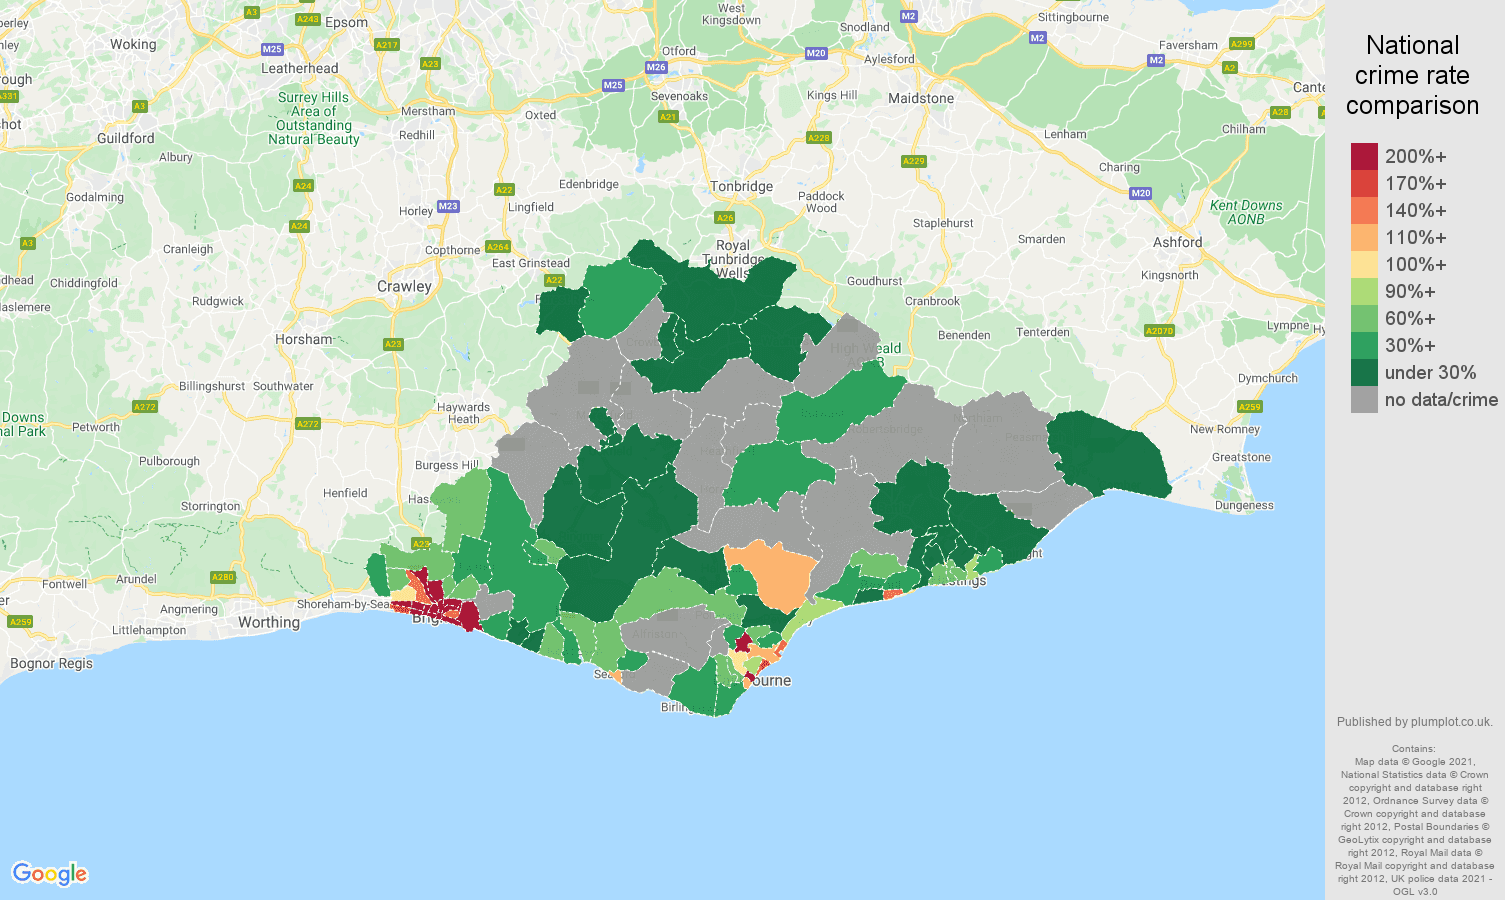 East Sussex bicycle theft crime rate comparison map